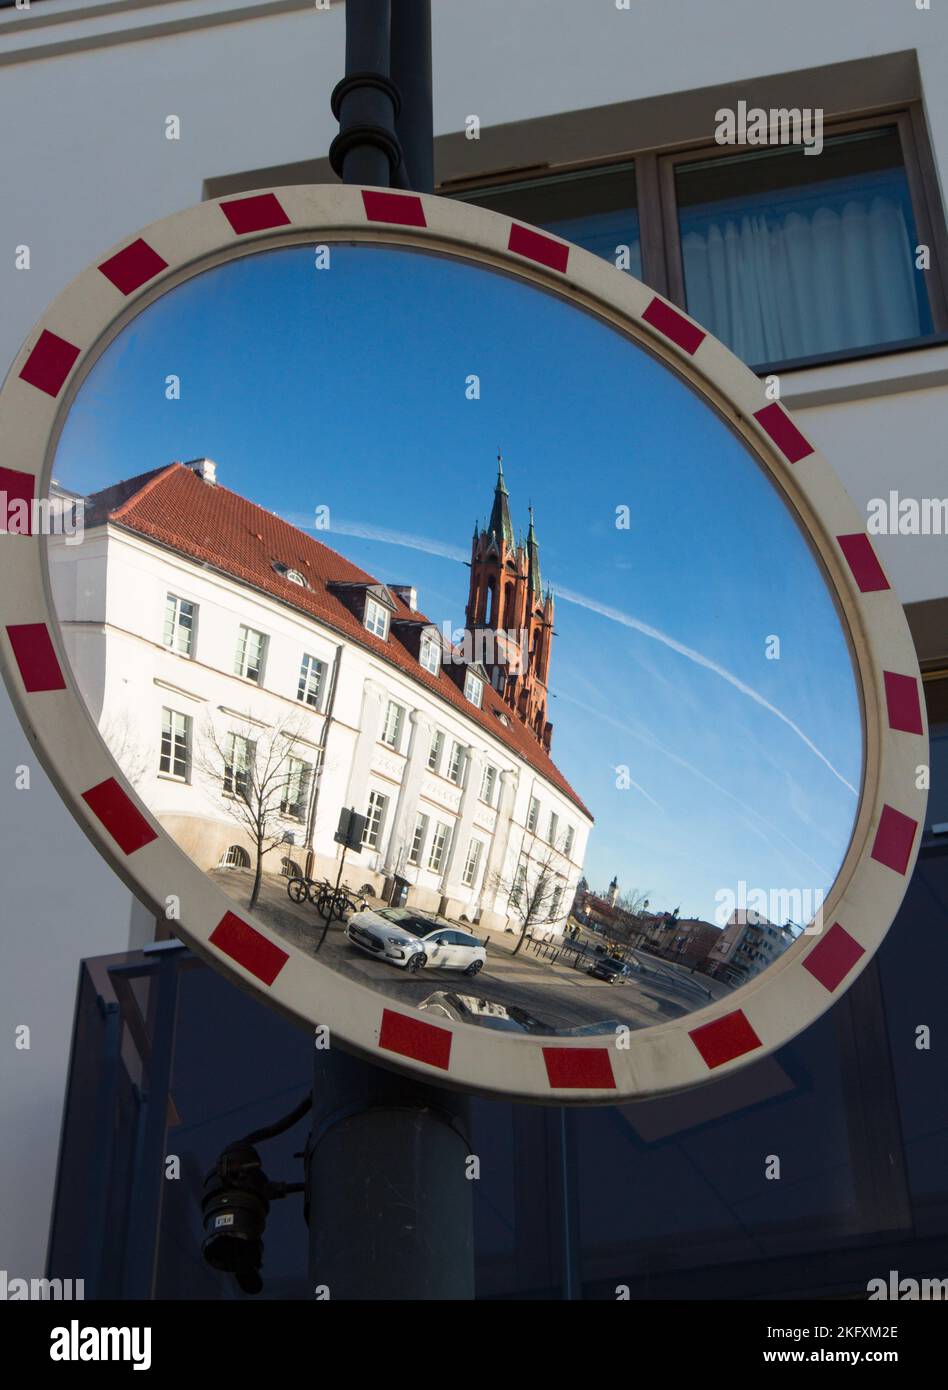 Mirror image of city center 22.11.2022 Bialystok Poland. Historical building and cathedral in the city center. Stock Photo